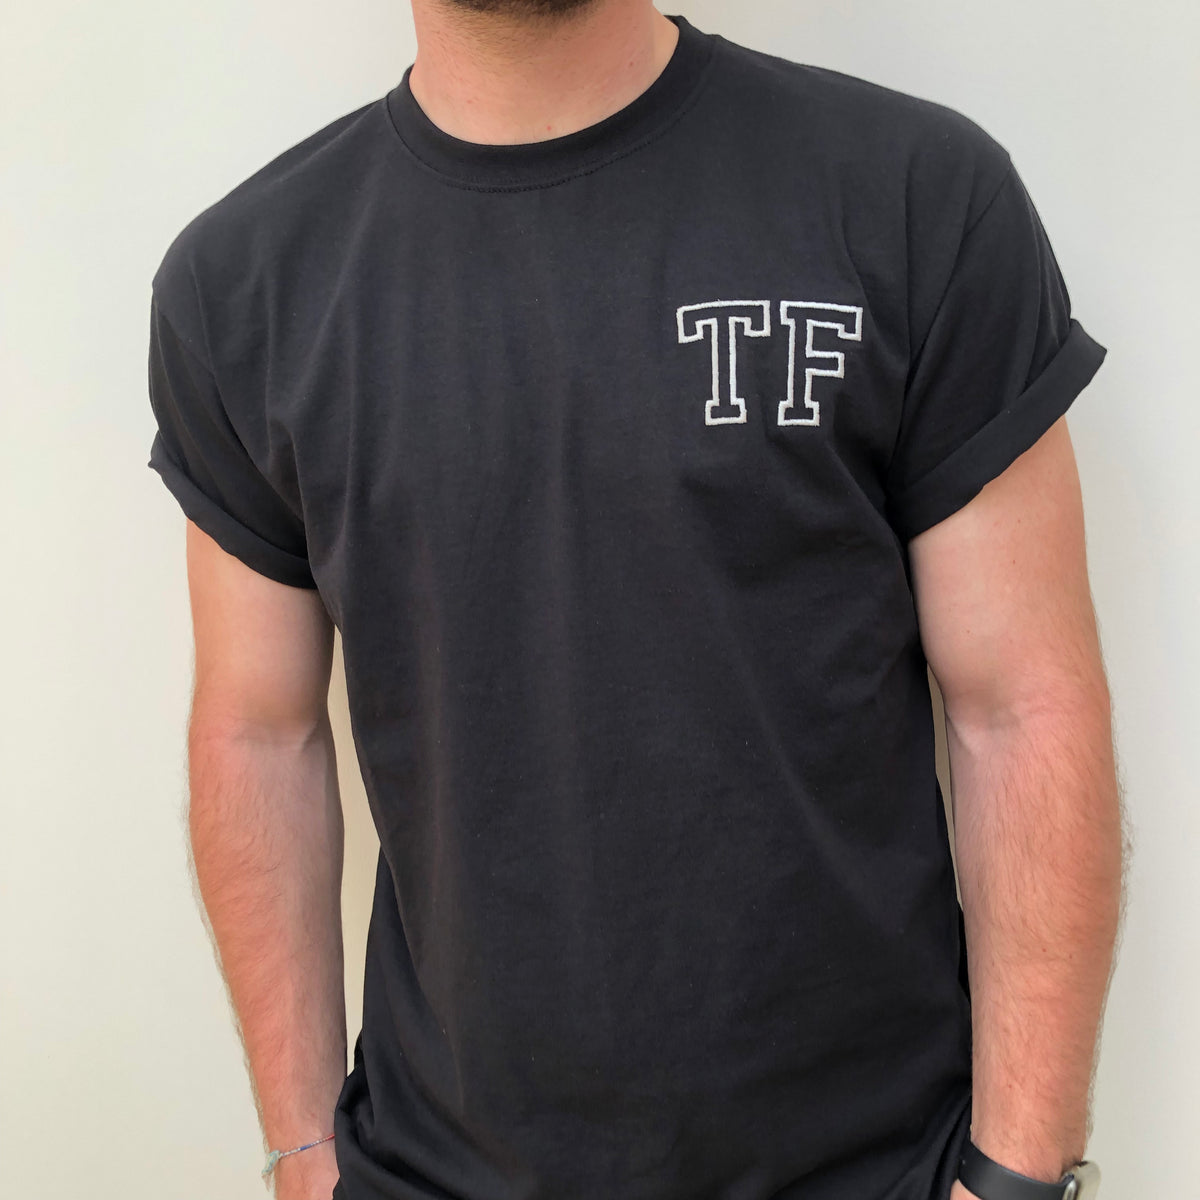 Black Personalised Text T-shirt. Create the best customised gifts for birthday, personalised gifts for boyfriends and anniversary gifts.